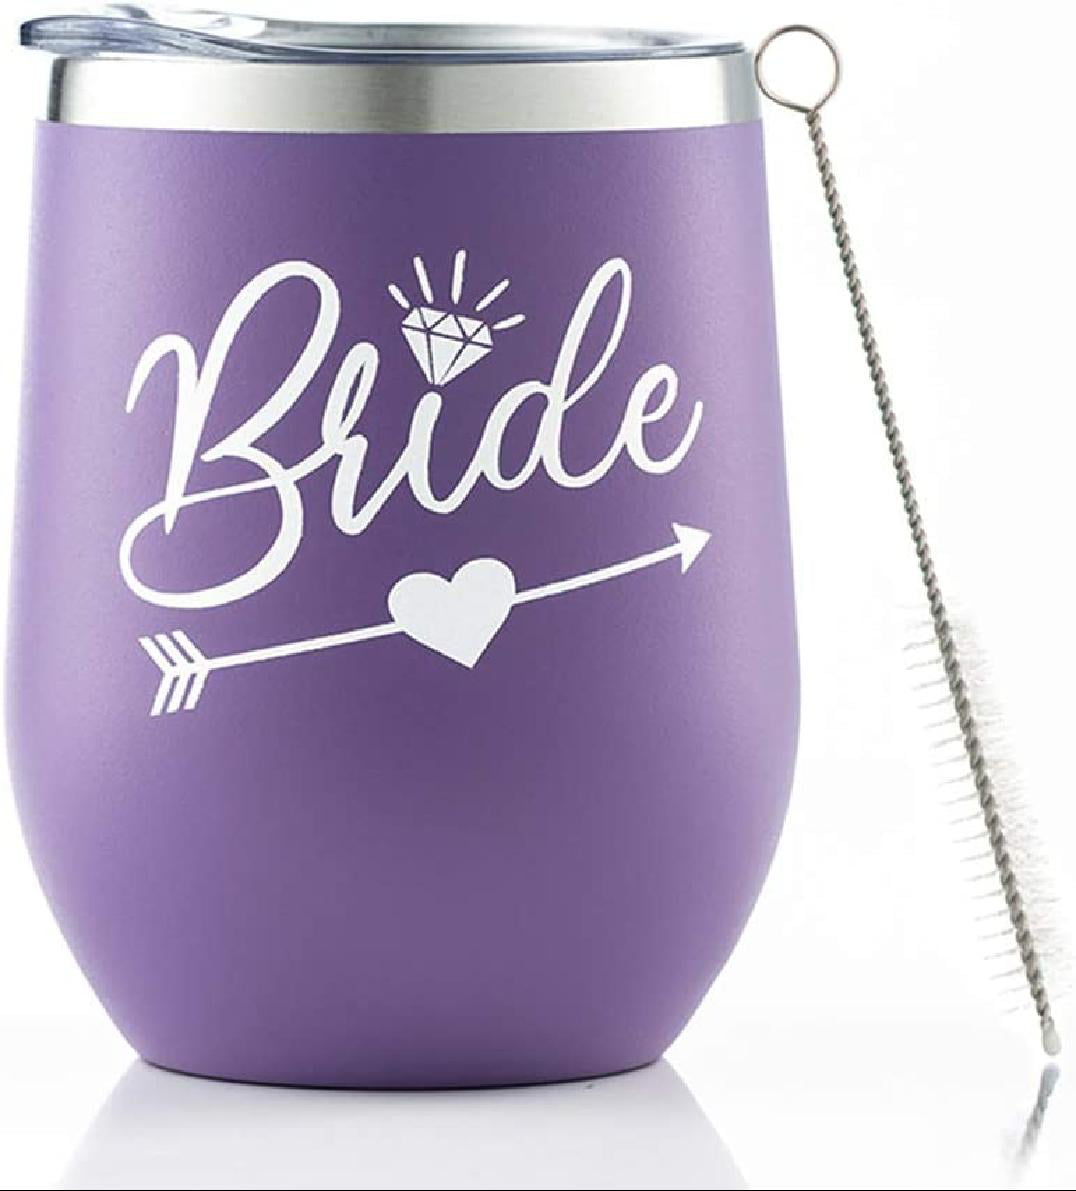 Bride Bride To Be White and Silver - Bride Gift 12 oz Stainless Steel Wine Tumbler with Lid Engagement Wedding Gift 